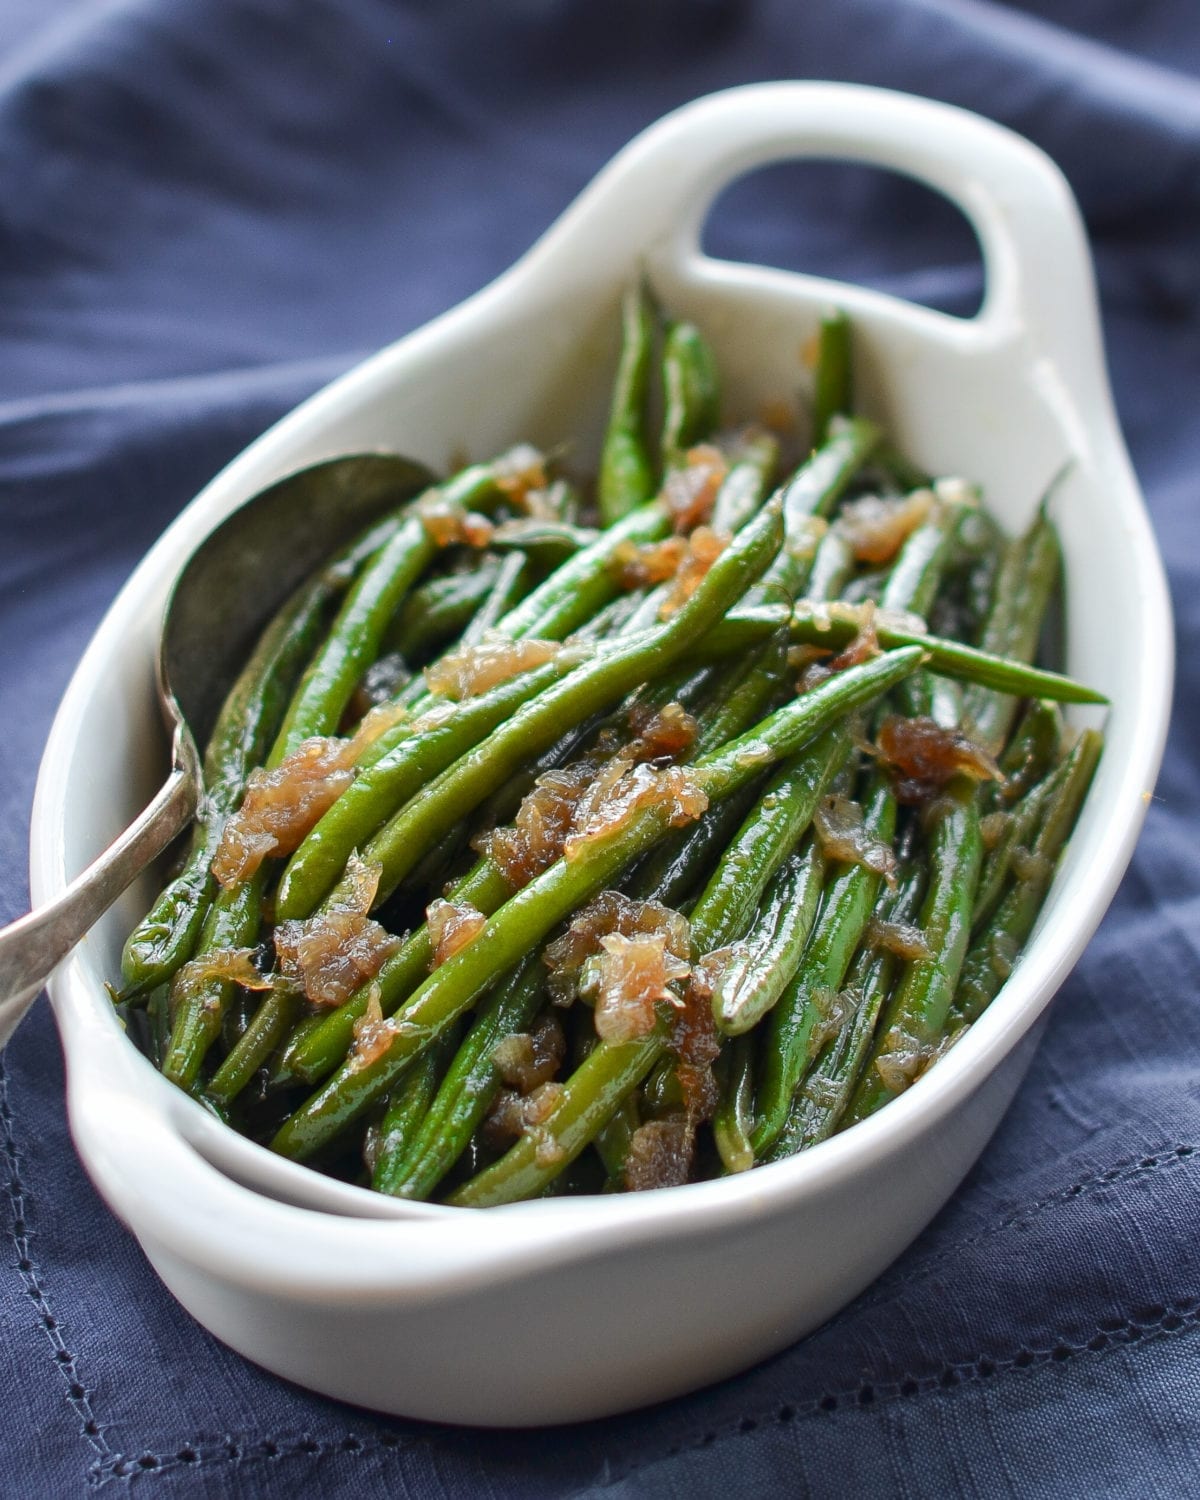 Haricots Verts Recipe: Delicious and Easy French Green Beans